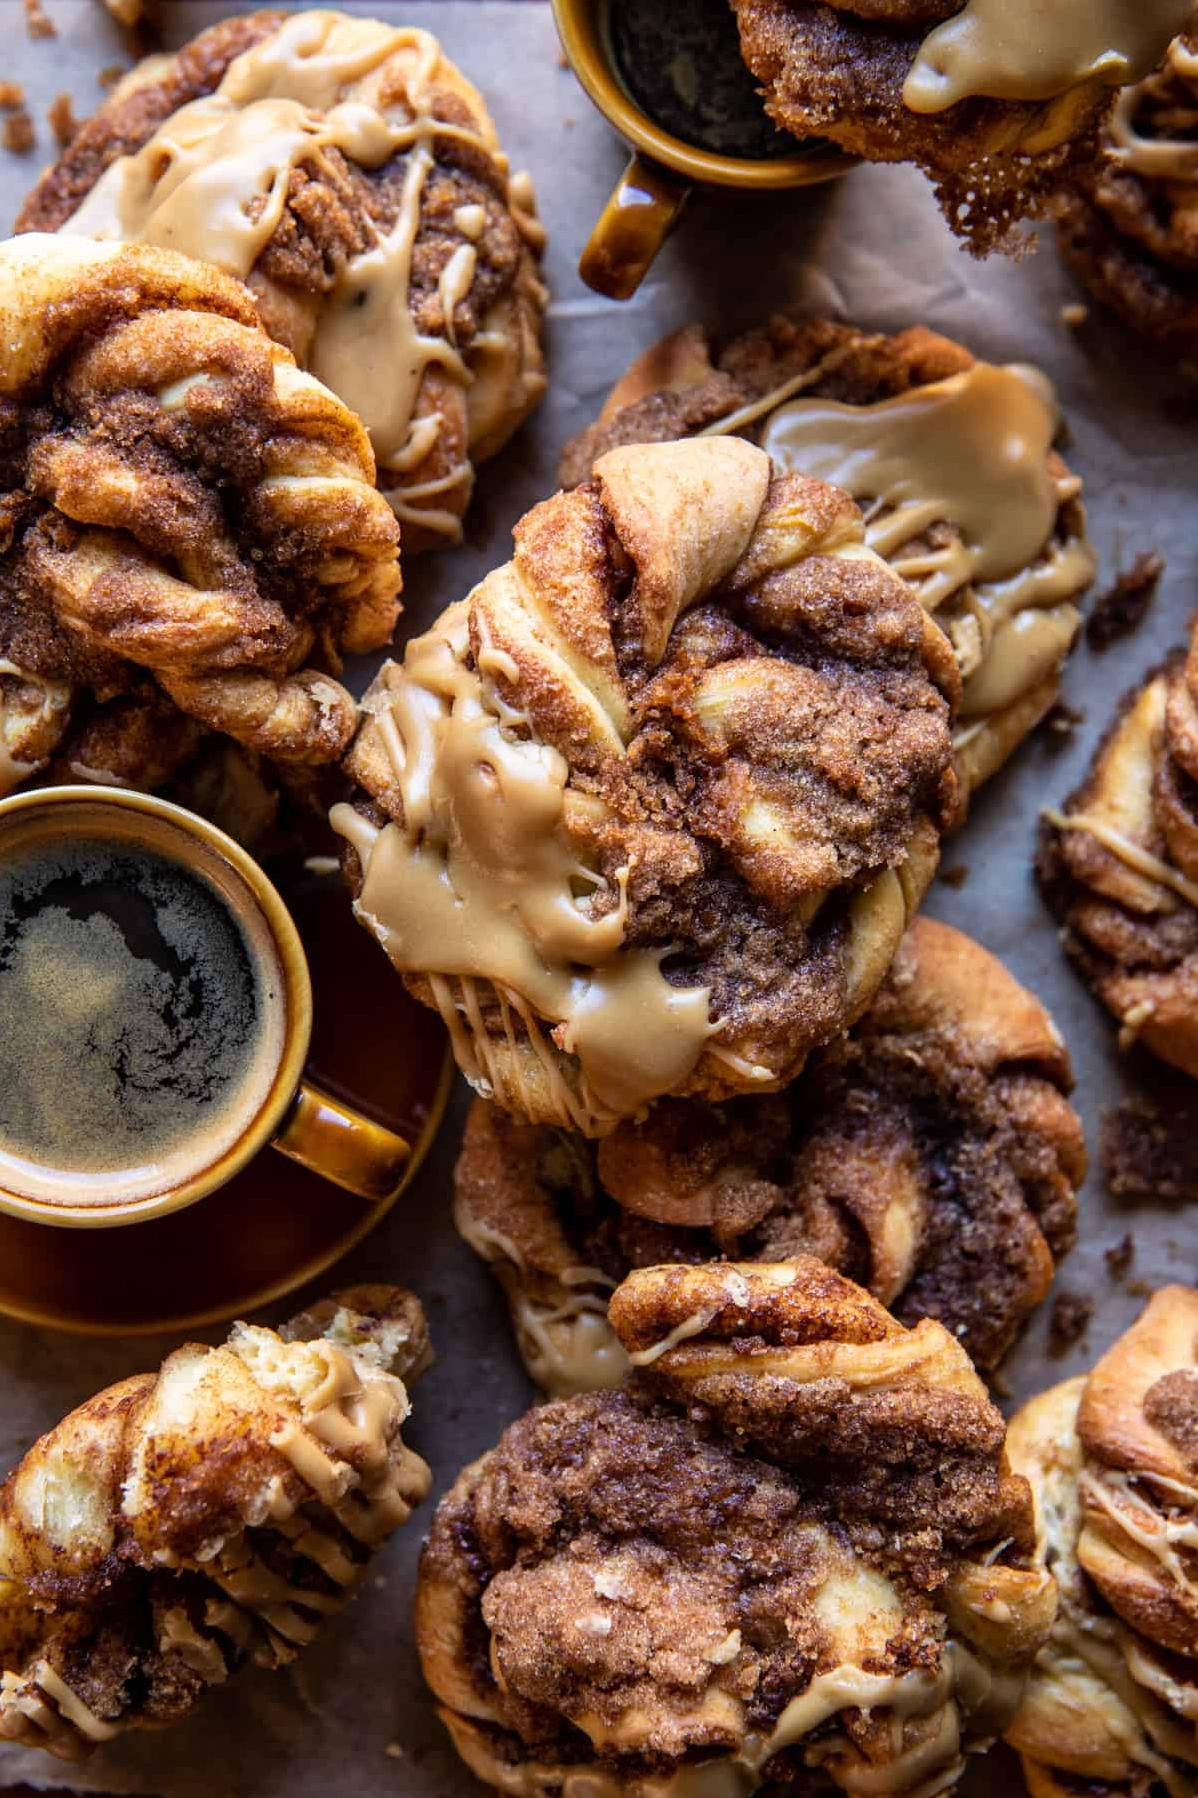 Warm Up Your Morning with This Gourmet Cinnamon Coffee Icing